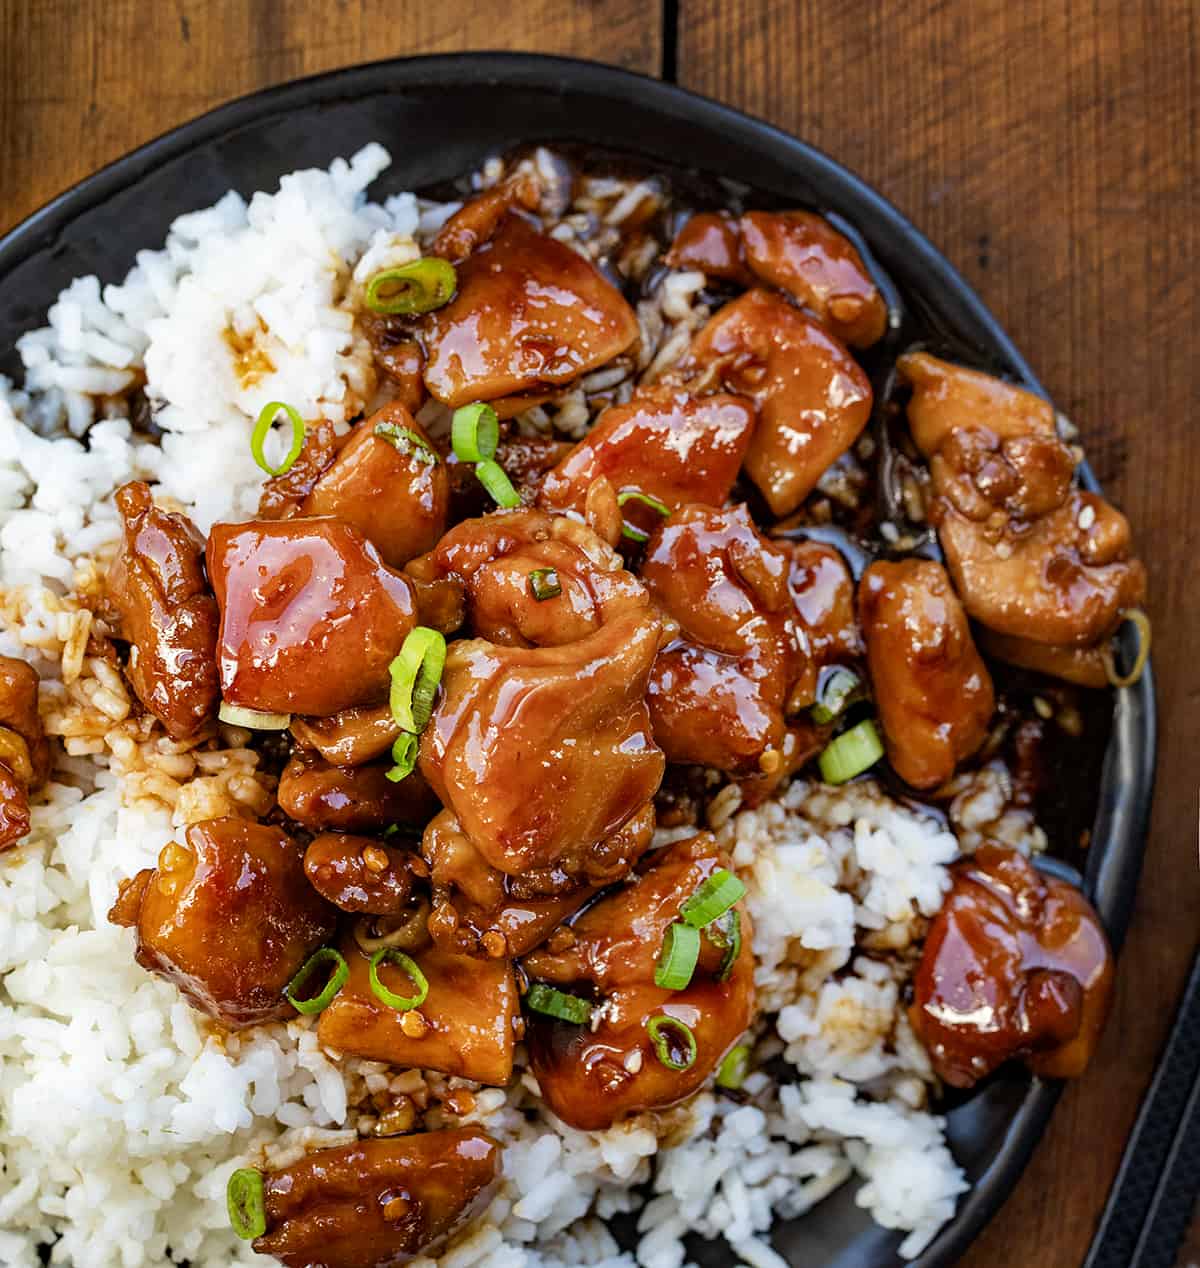 Plate of Bourbon Chicken on rice.